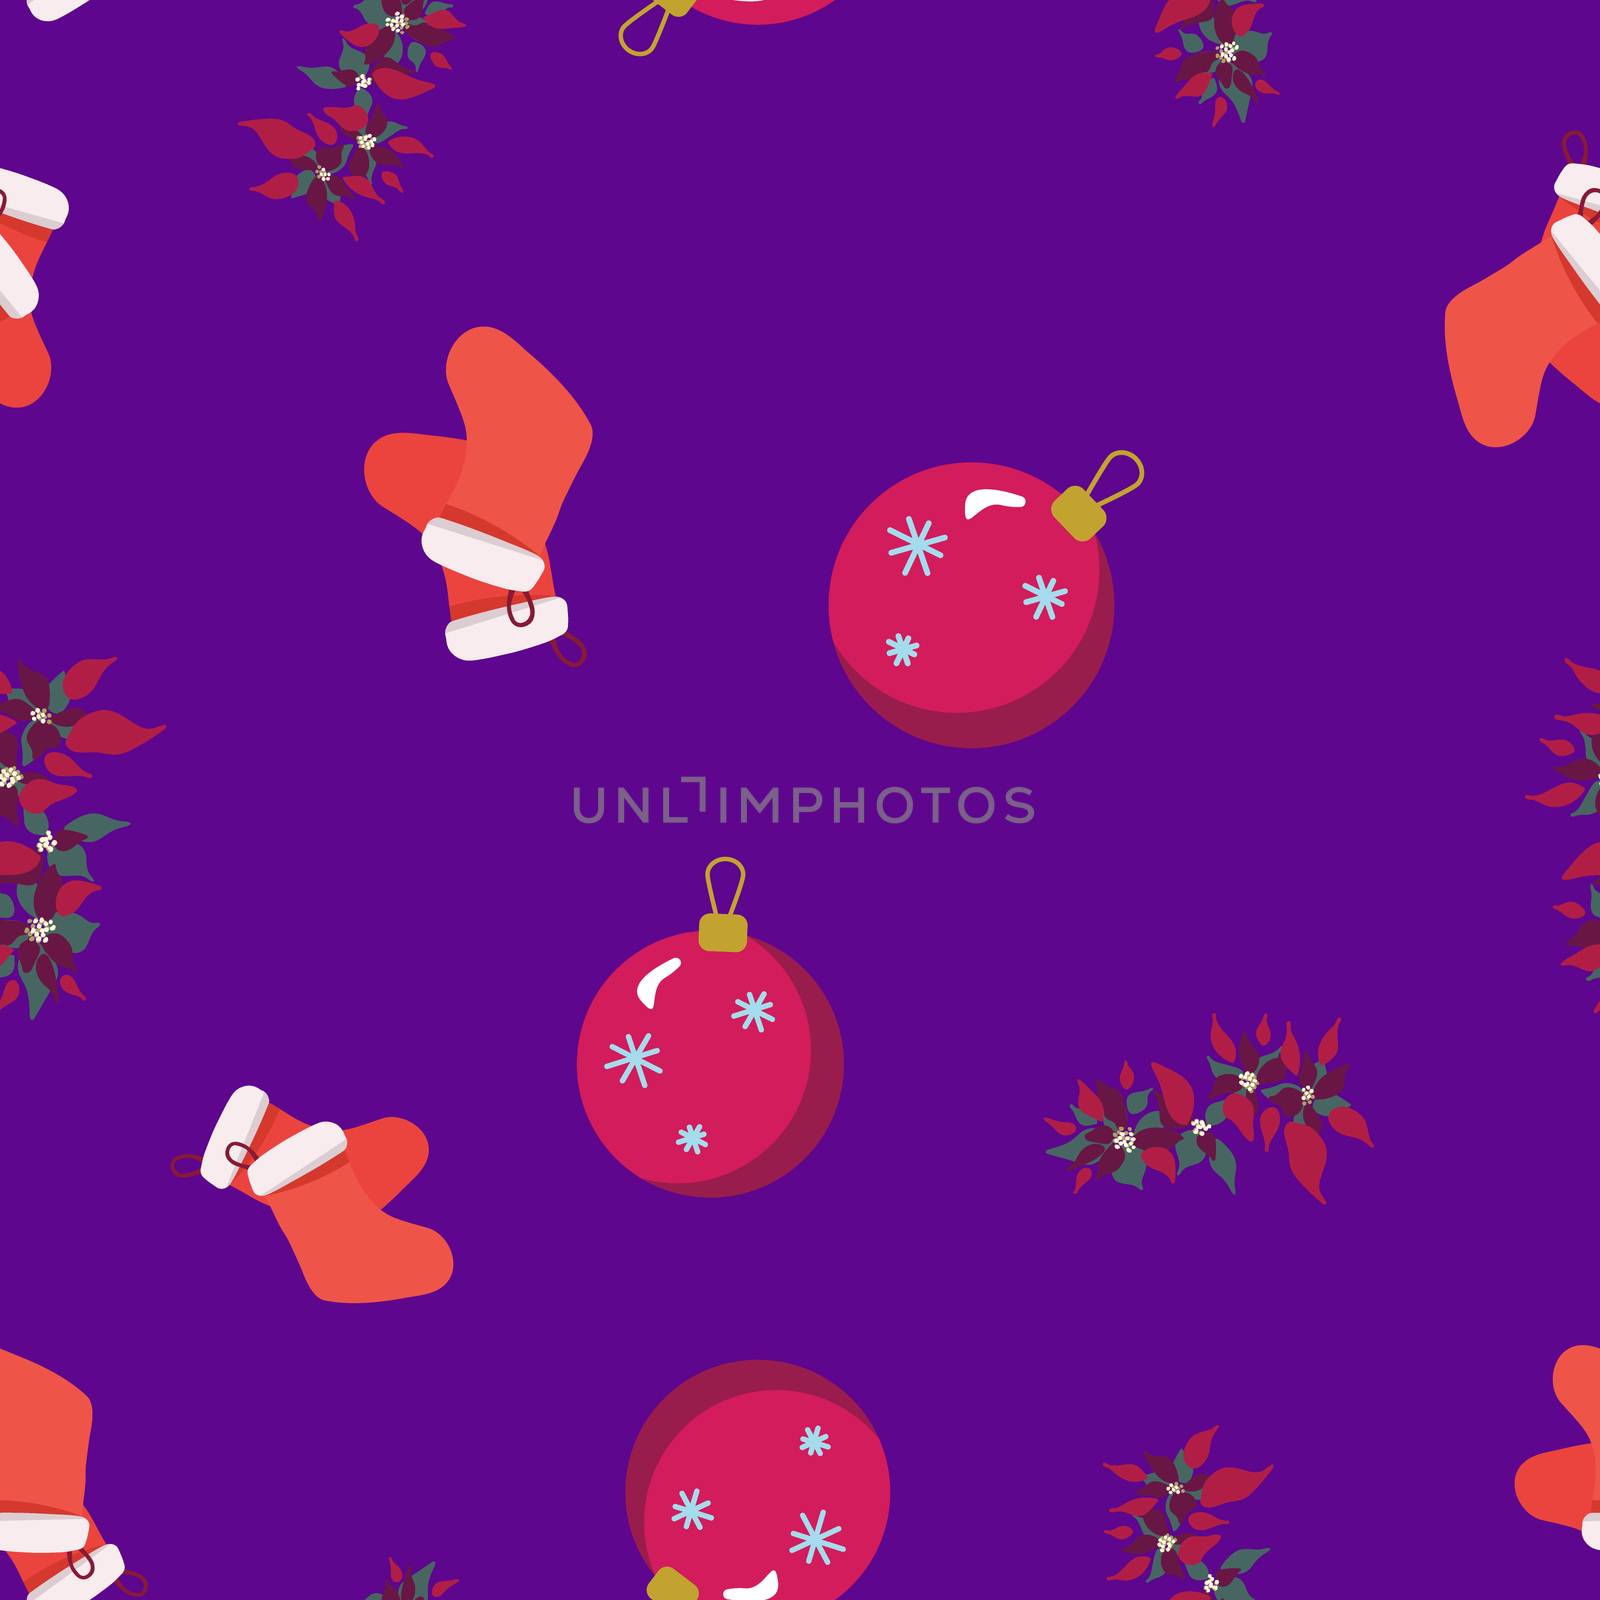 Christmas red stockings, tree bubble and poinsettia seamless pattern. Festive endless design. Holiday decor wrapping paper, background. Colorful vector illustration in flat cartoon style.